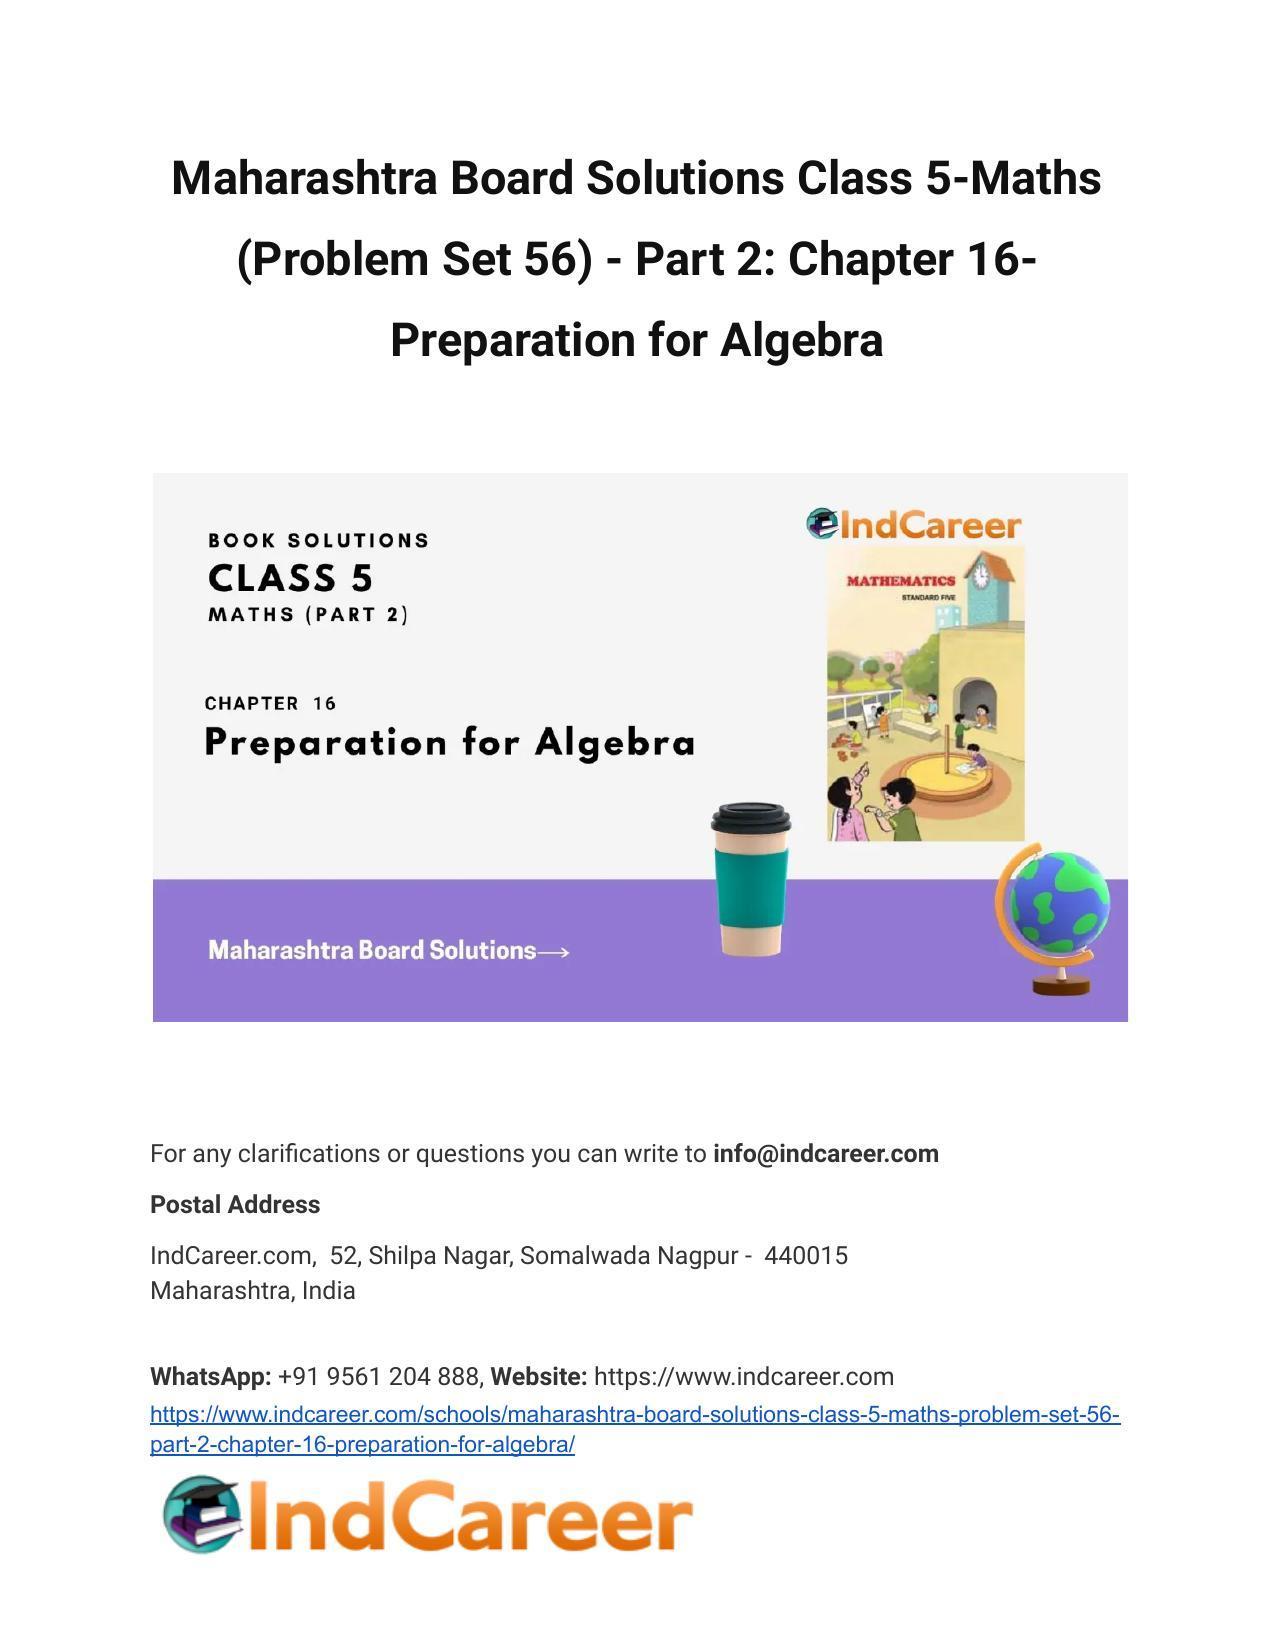 Maharashtra Board Solutions Class 5-Maths (Problem Set 56) - Part 2: Chapter 16- Preparation for Algebra - Page 1